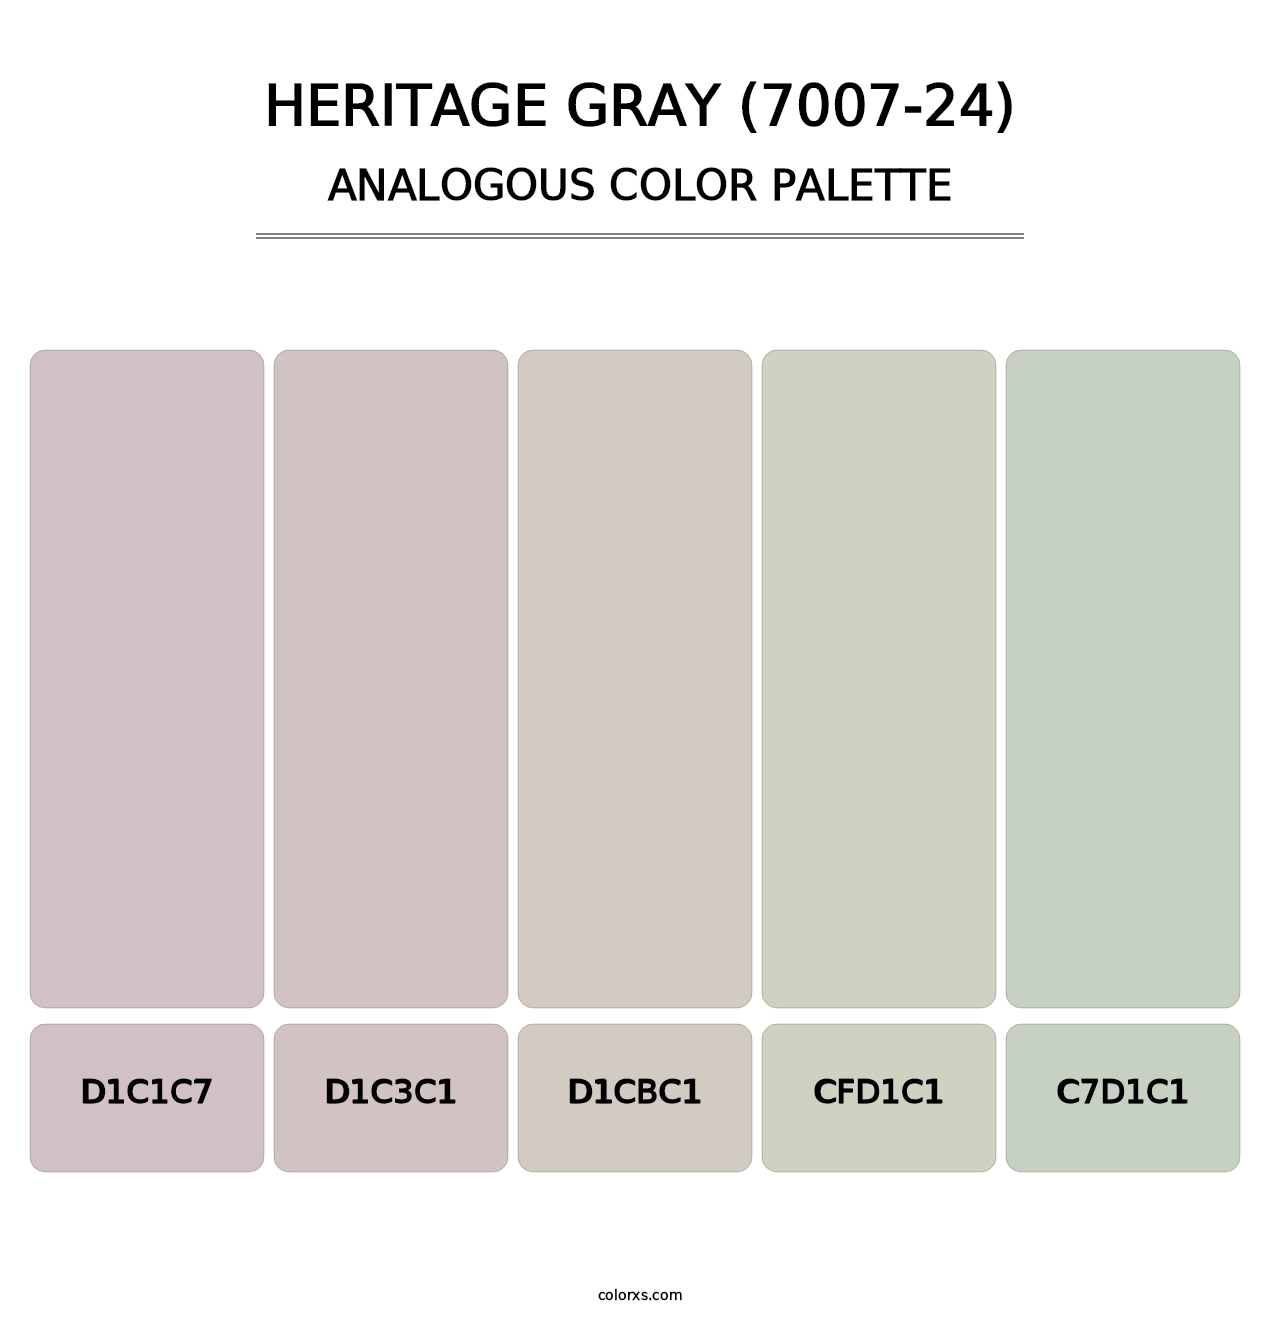 Heritage Gray (7007-24) - Analogous Color Palette